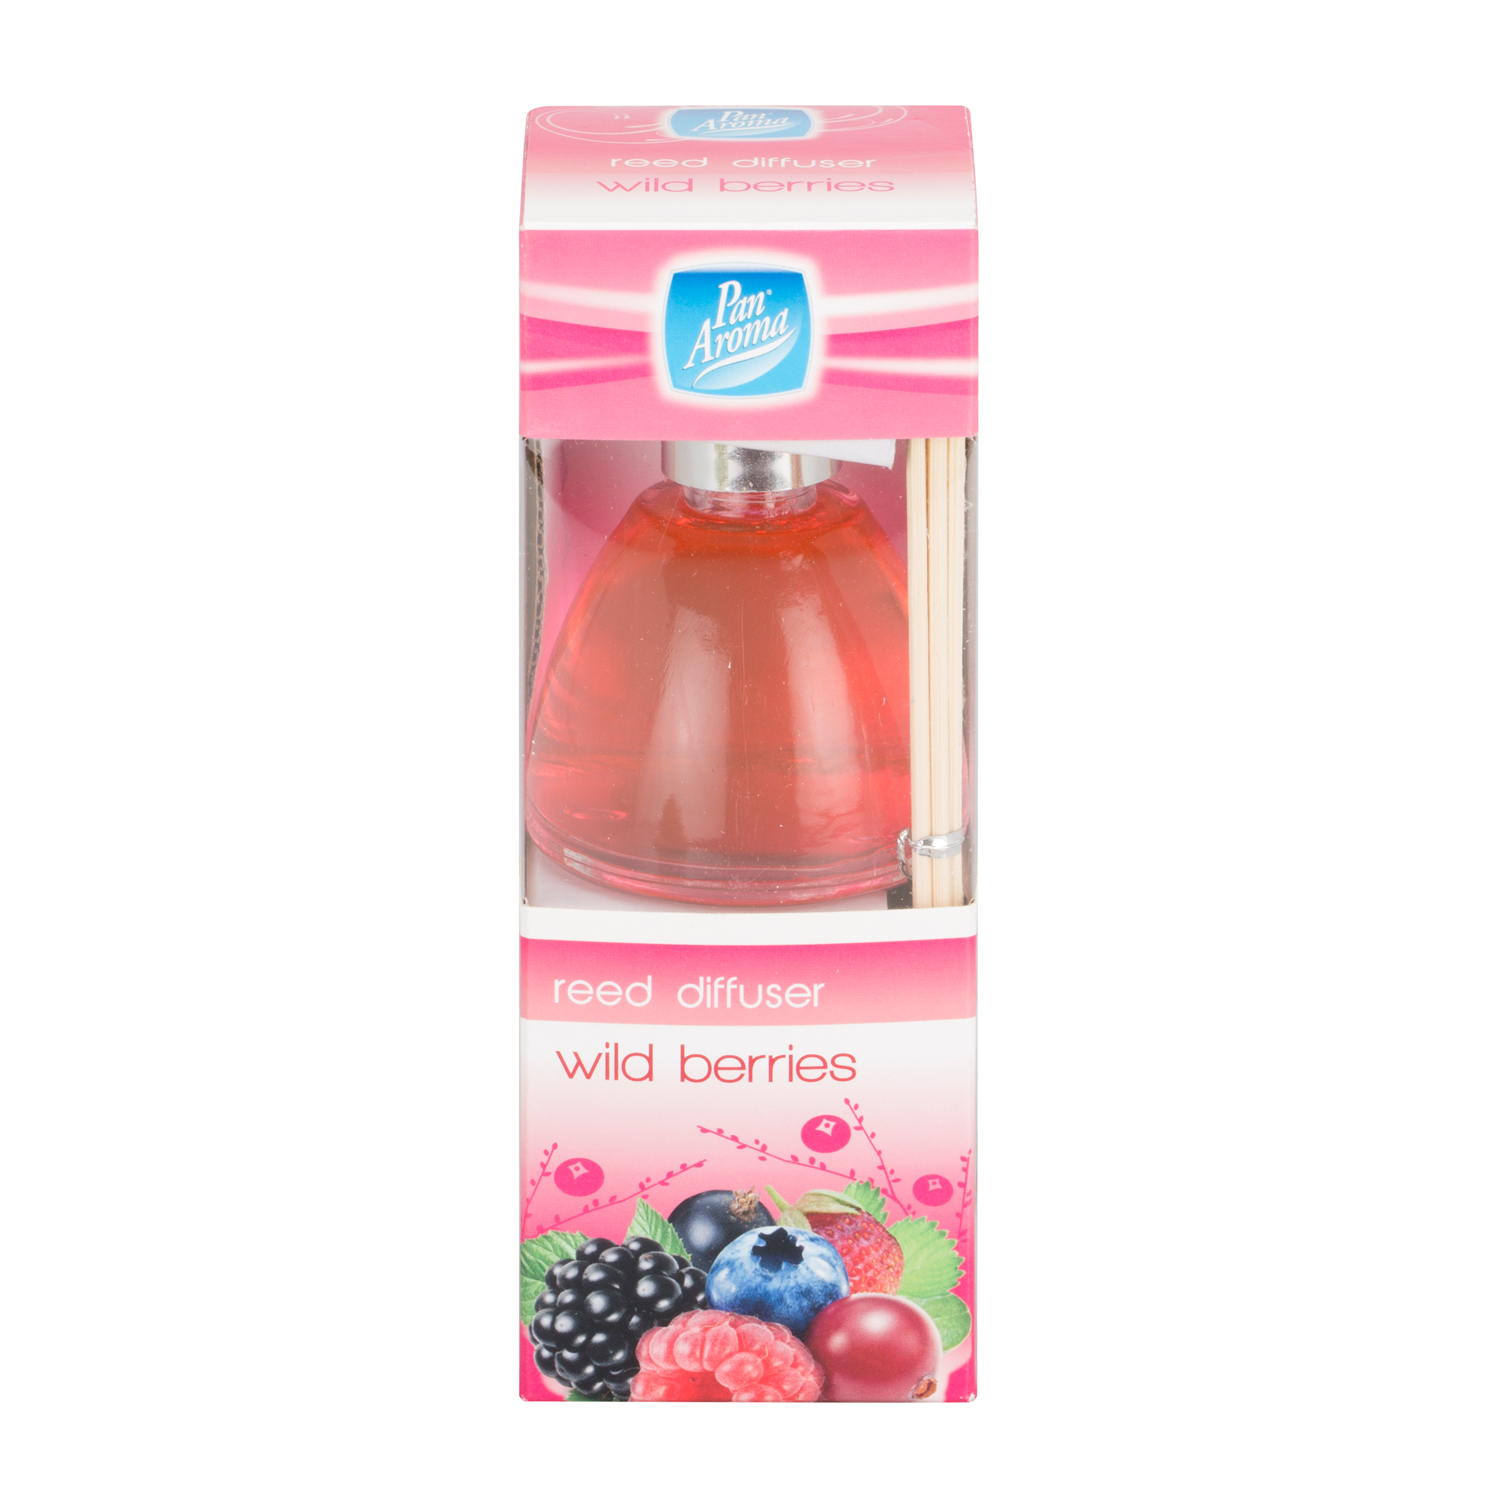 Pan Aroma Wild Berries Dome Reed Diffuser 50ml Image 1